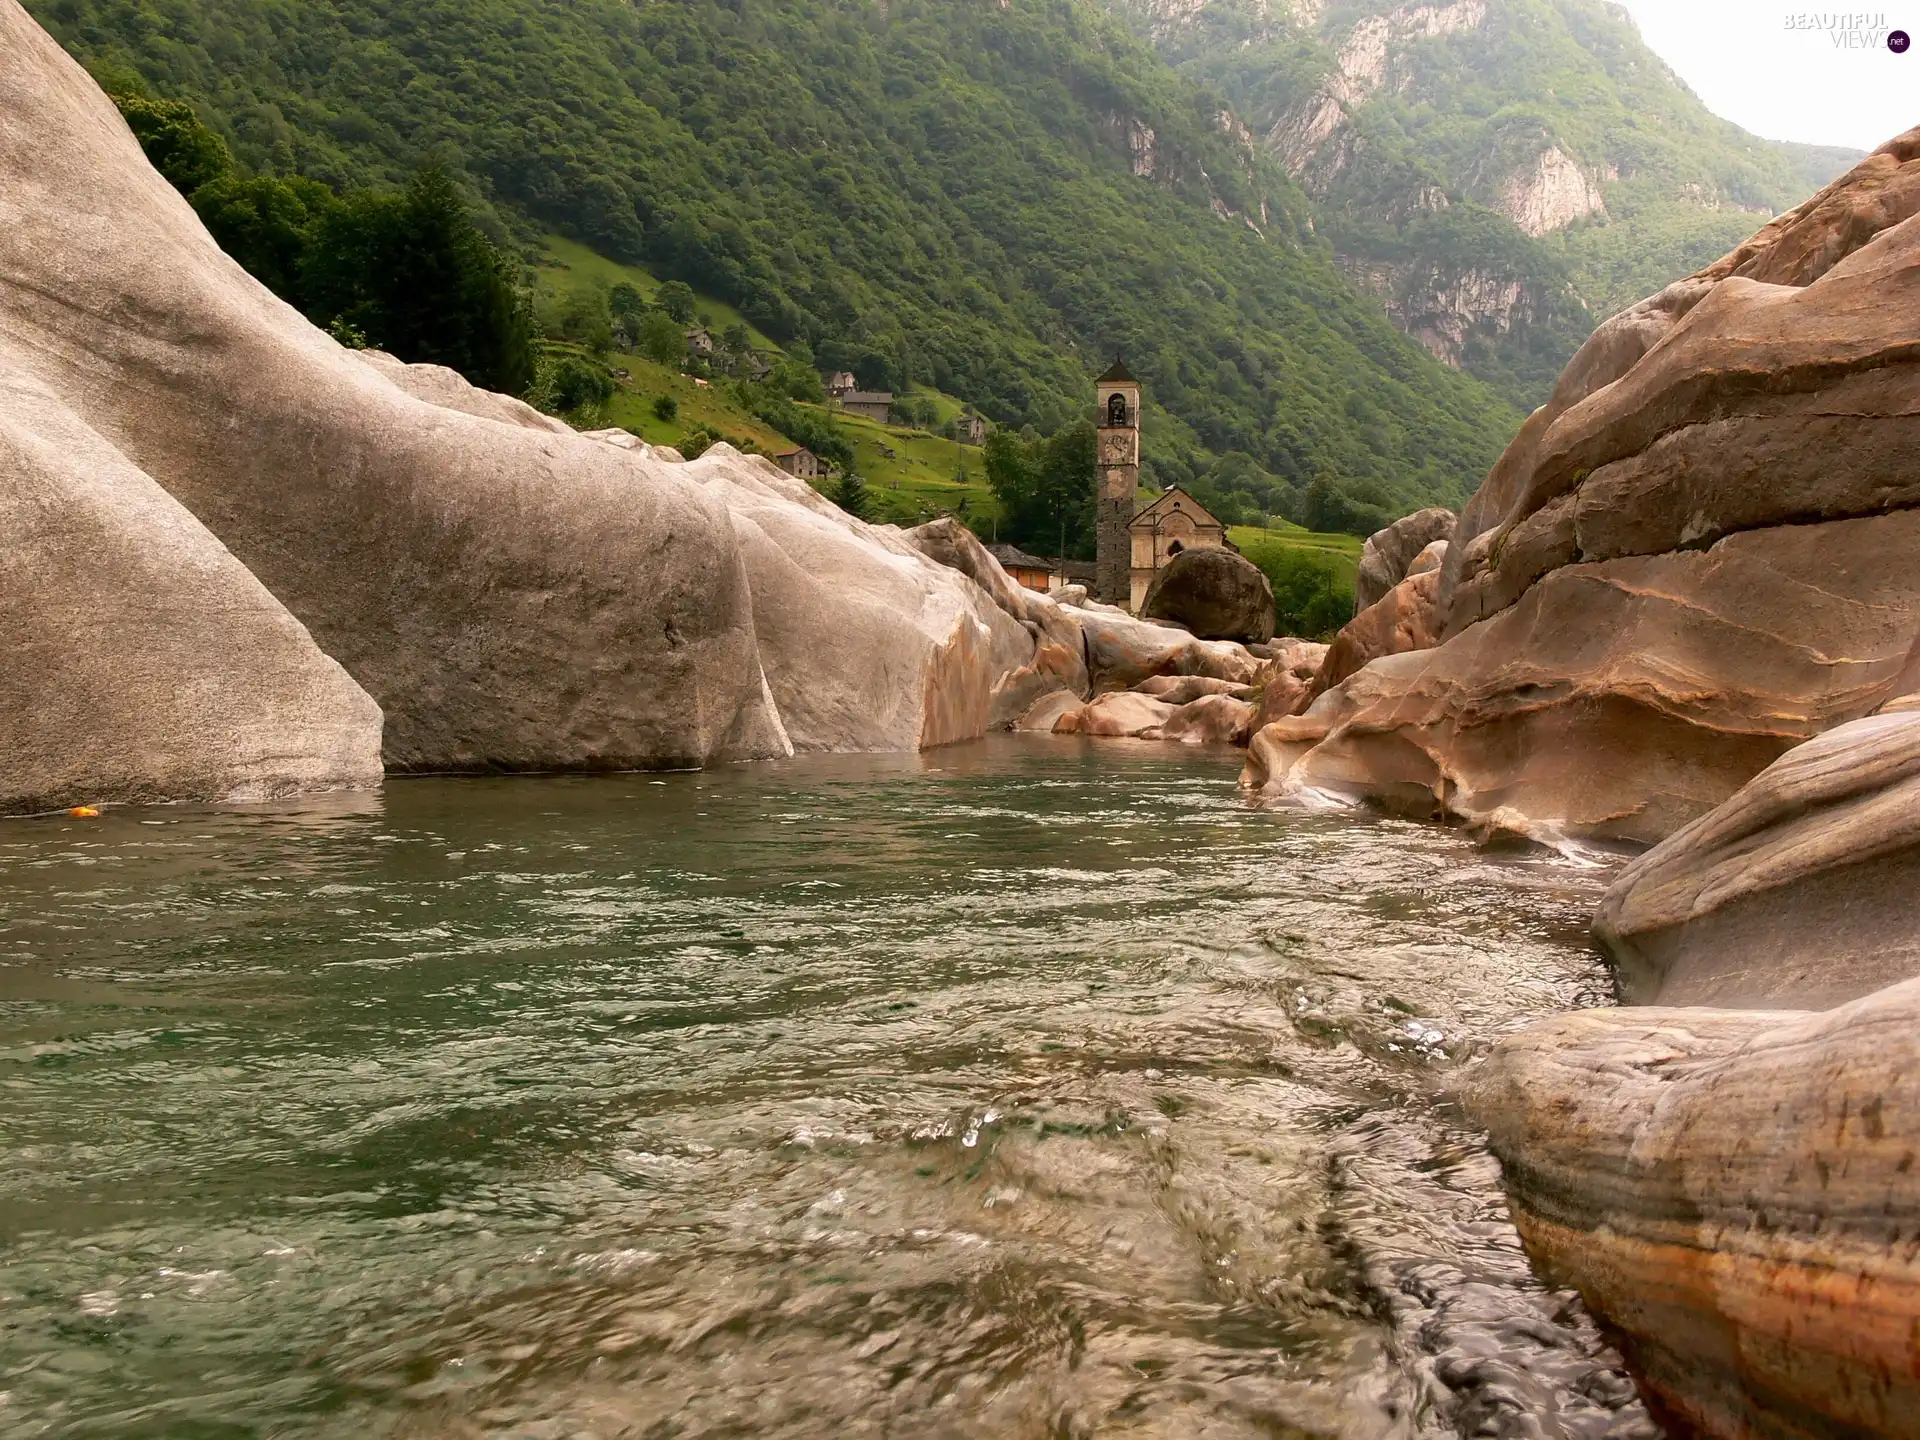 River, rocks, Mountains, The relief